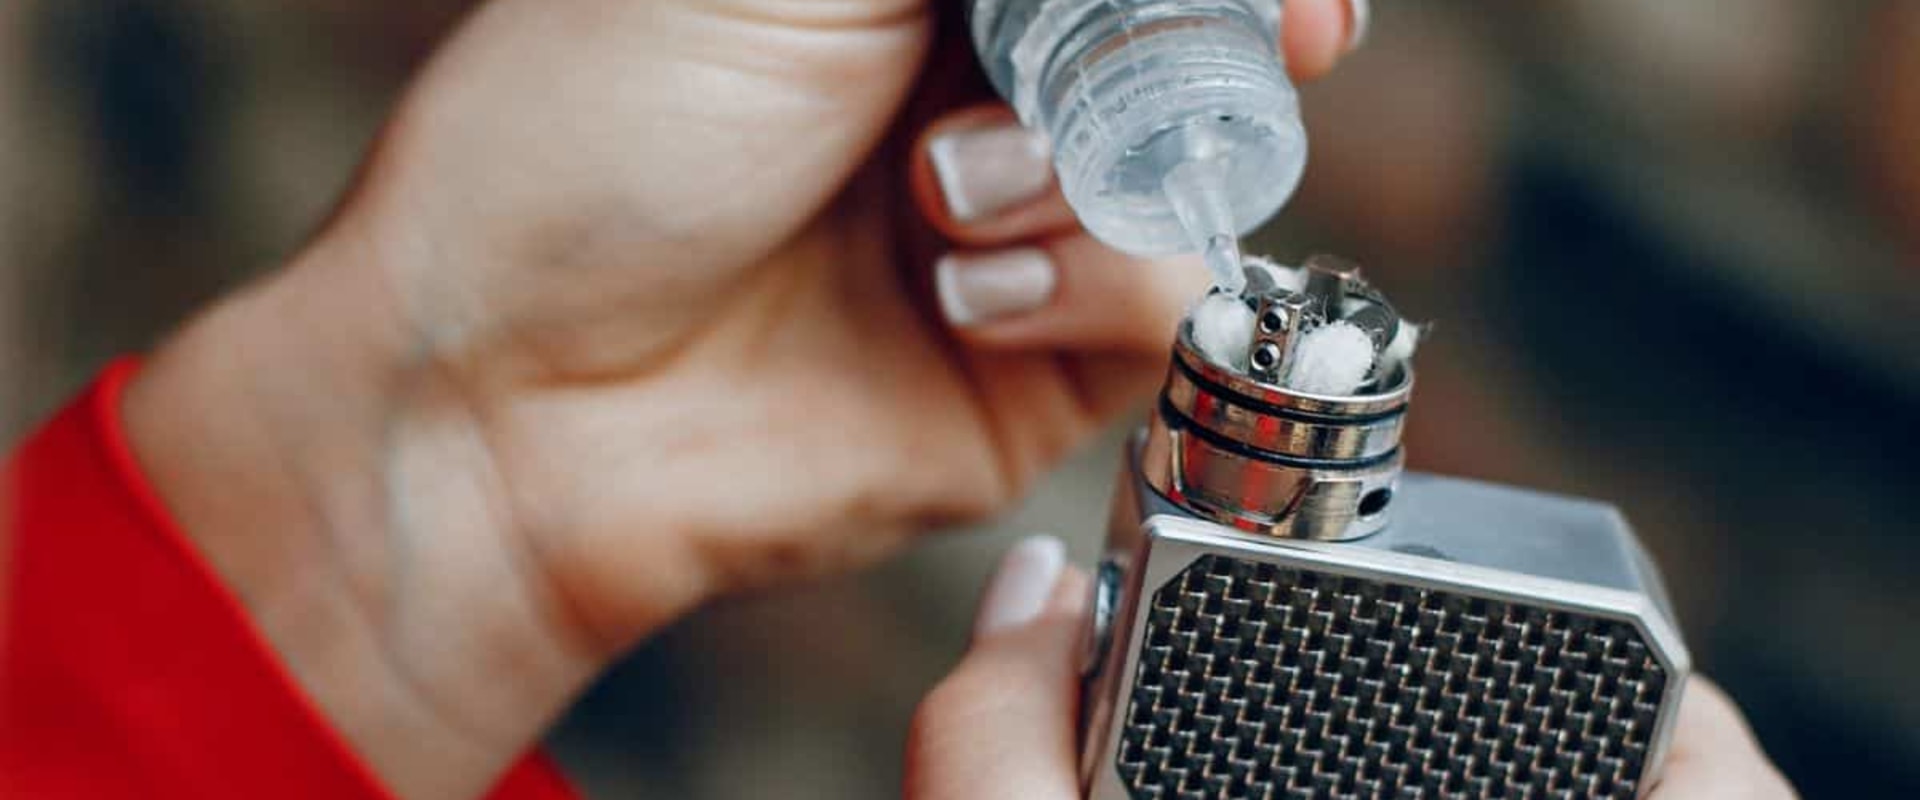 Everything You Need to Know About Refilling Your Vape Tank